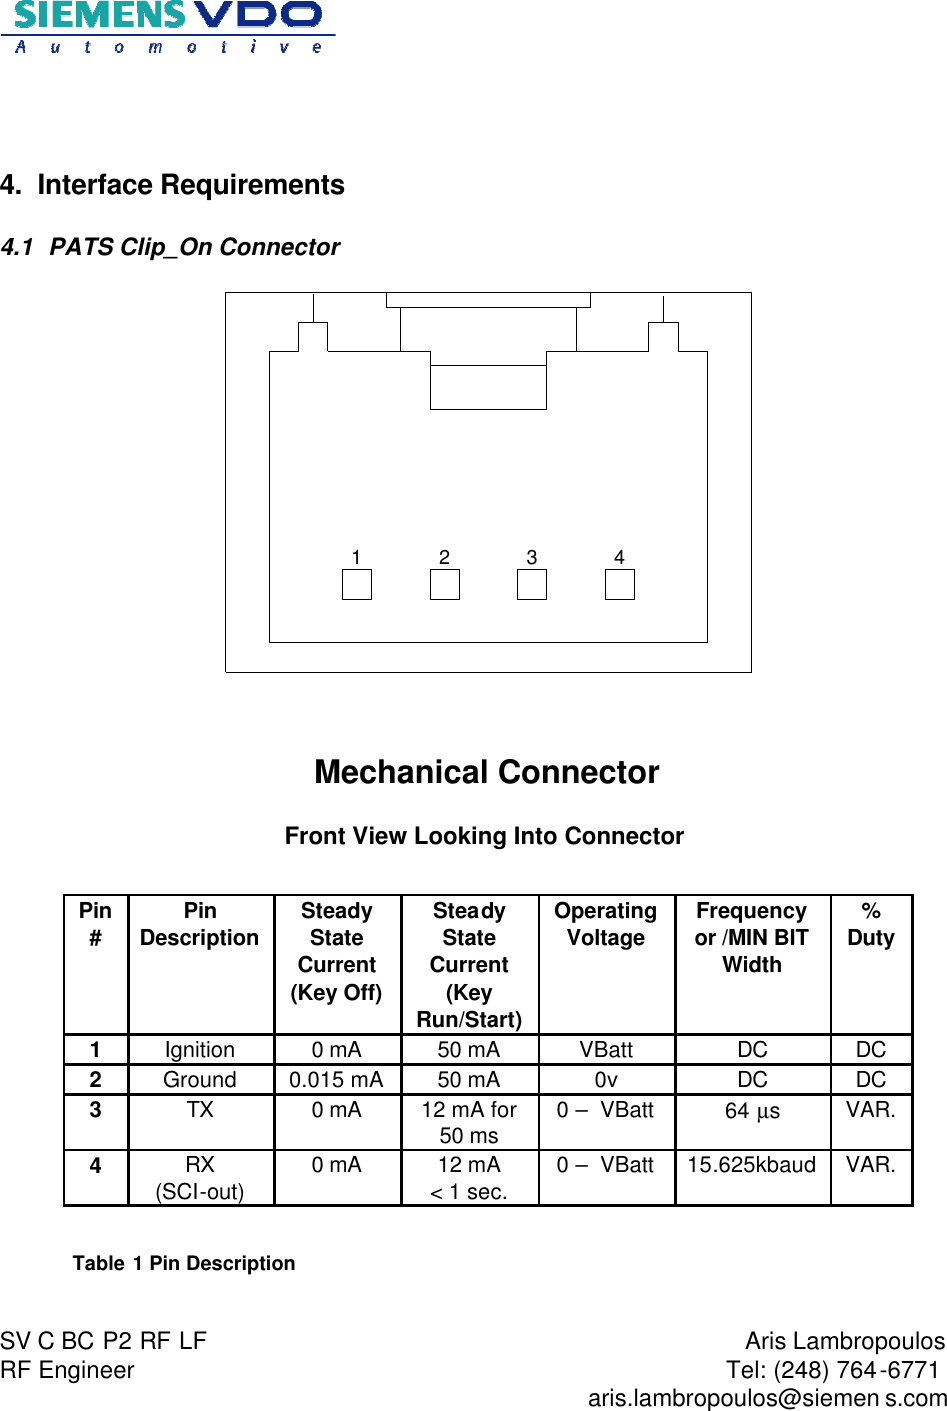                           SV C BC P2 RF LF  RF Engineer  Aris Lambropoulos Tel: (248) 764-6771   aris.lambropoulos@siemen s.com     4. Interface Requirements 4.1  PATS Clip_On Connector   1 2 3 4   Mechanical Connector  Front View Looking Into Connector   Table 1 Pin Description  Pin #  Pin Description Steady State Current  (Key Off) Steady State Current  (Key Run/Start) Operating Voltage Frequency or /MIN BIT Width % Duty 1  Ignition  0 mA 50 mA VBatt DC DC 2  Ground 0.015 mA 50 mA 0v DC DC 3  TX 0 mA 12 mA for  50 ms 0 –  VBatt 64 µs  VAR. 4  RX (SCI-out)  0 mA 12 mA  &lt; 1 sec. 0 –  VBatt 15.625kbaud VAR. 